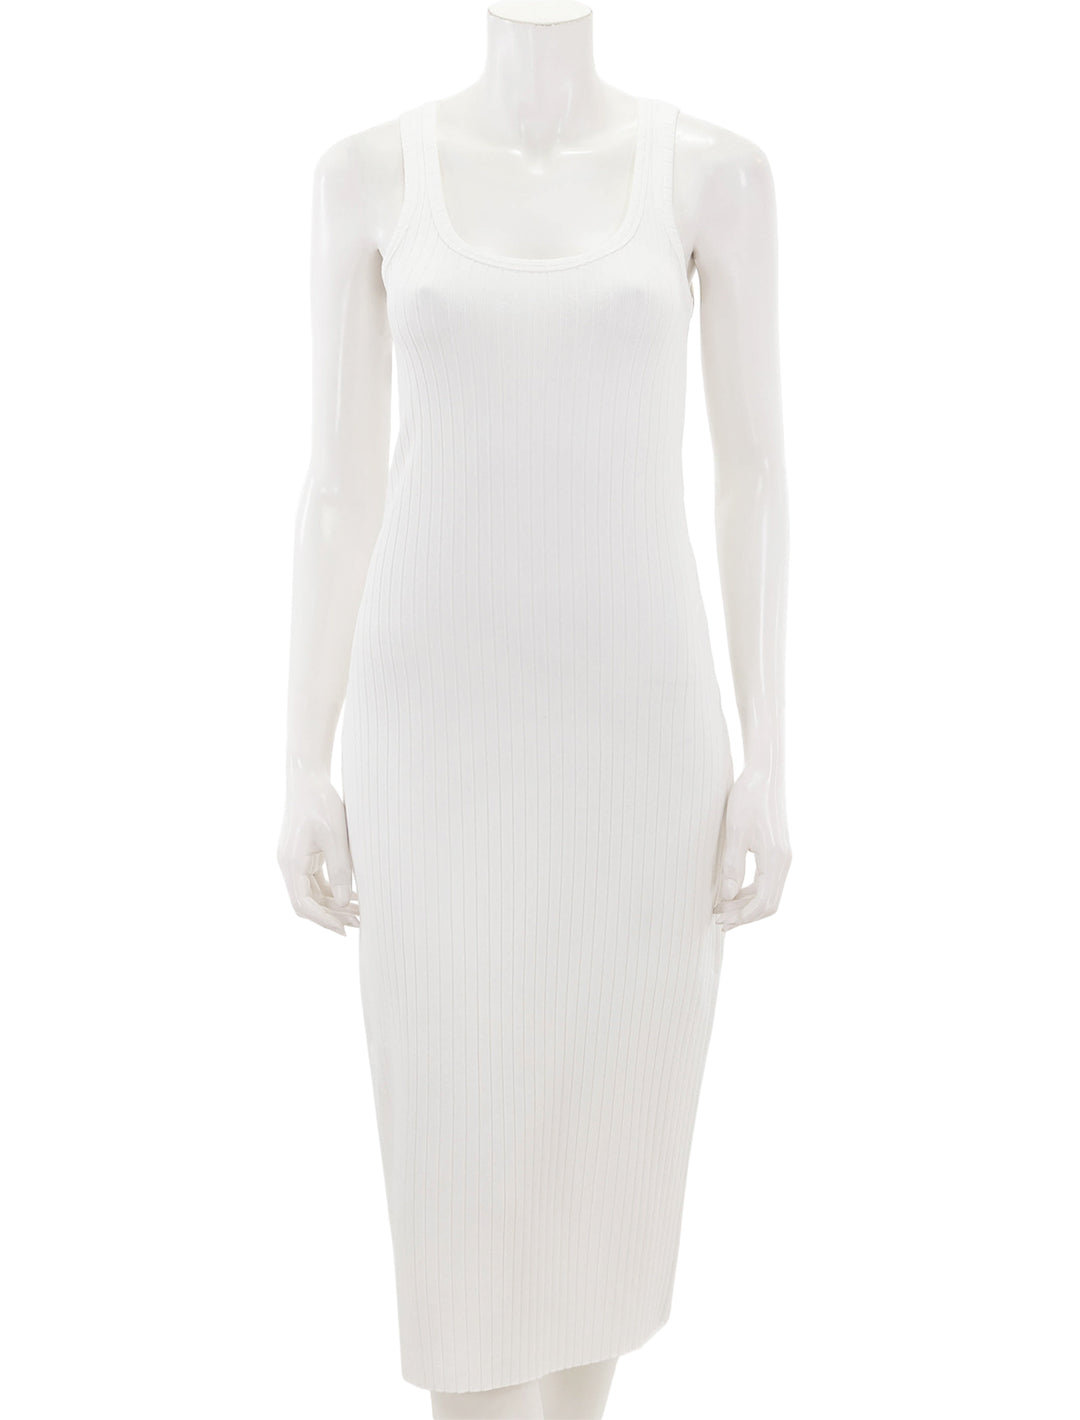 Front view of Vince's rib scoop neck dress in off white.